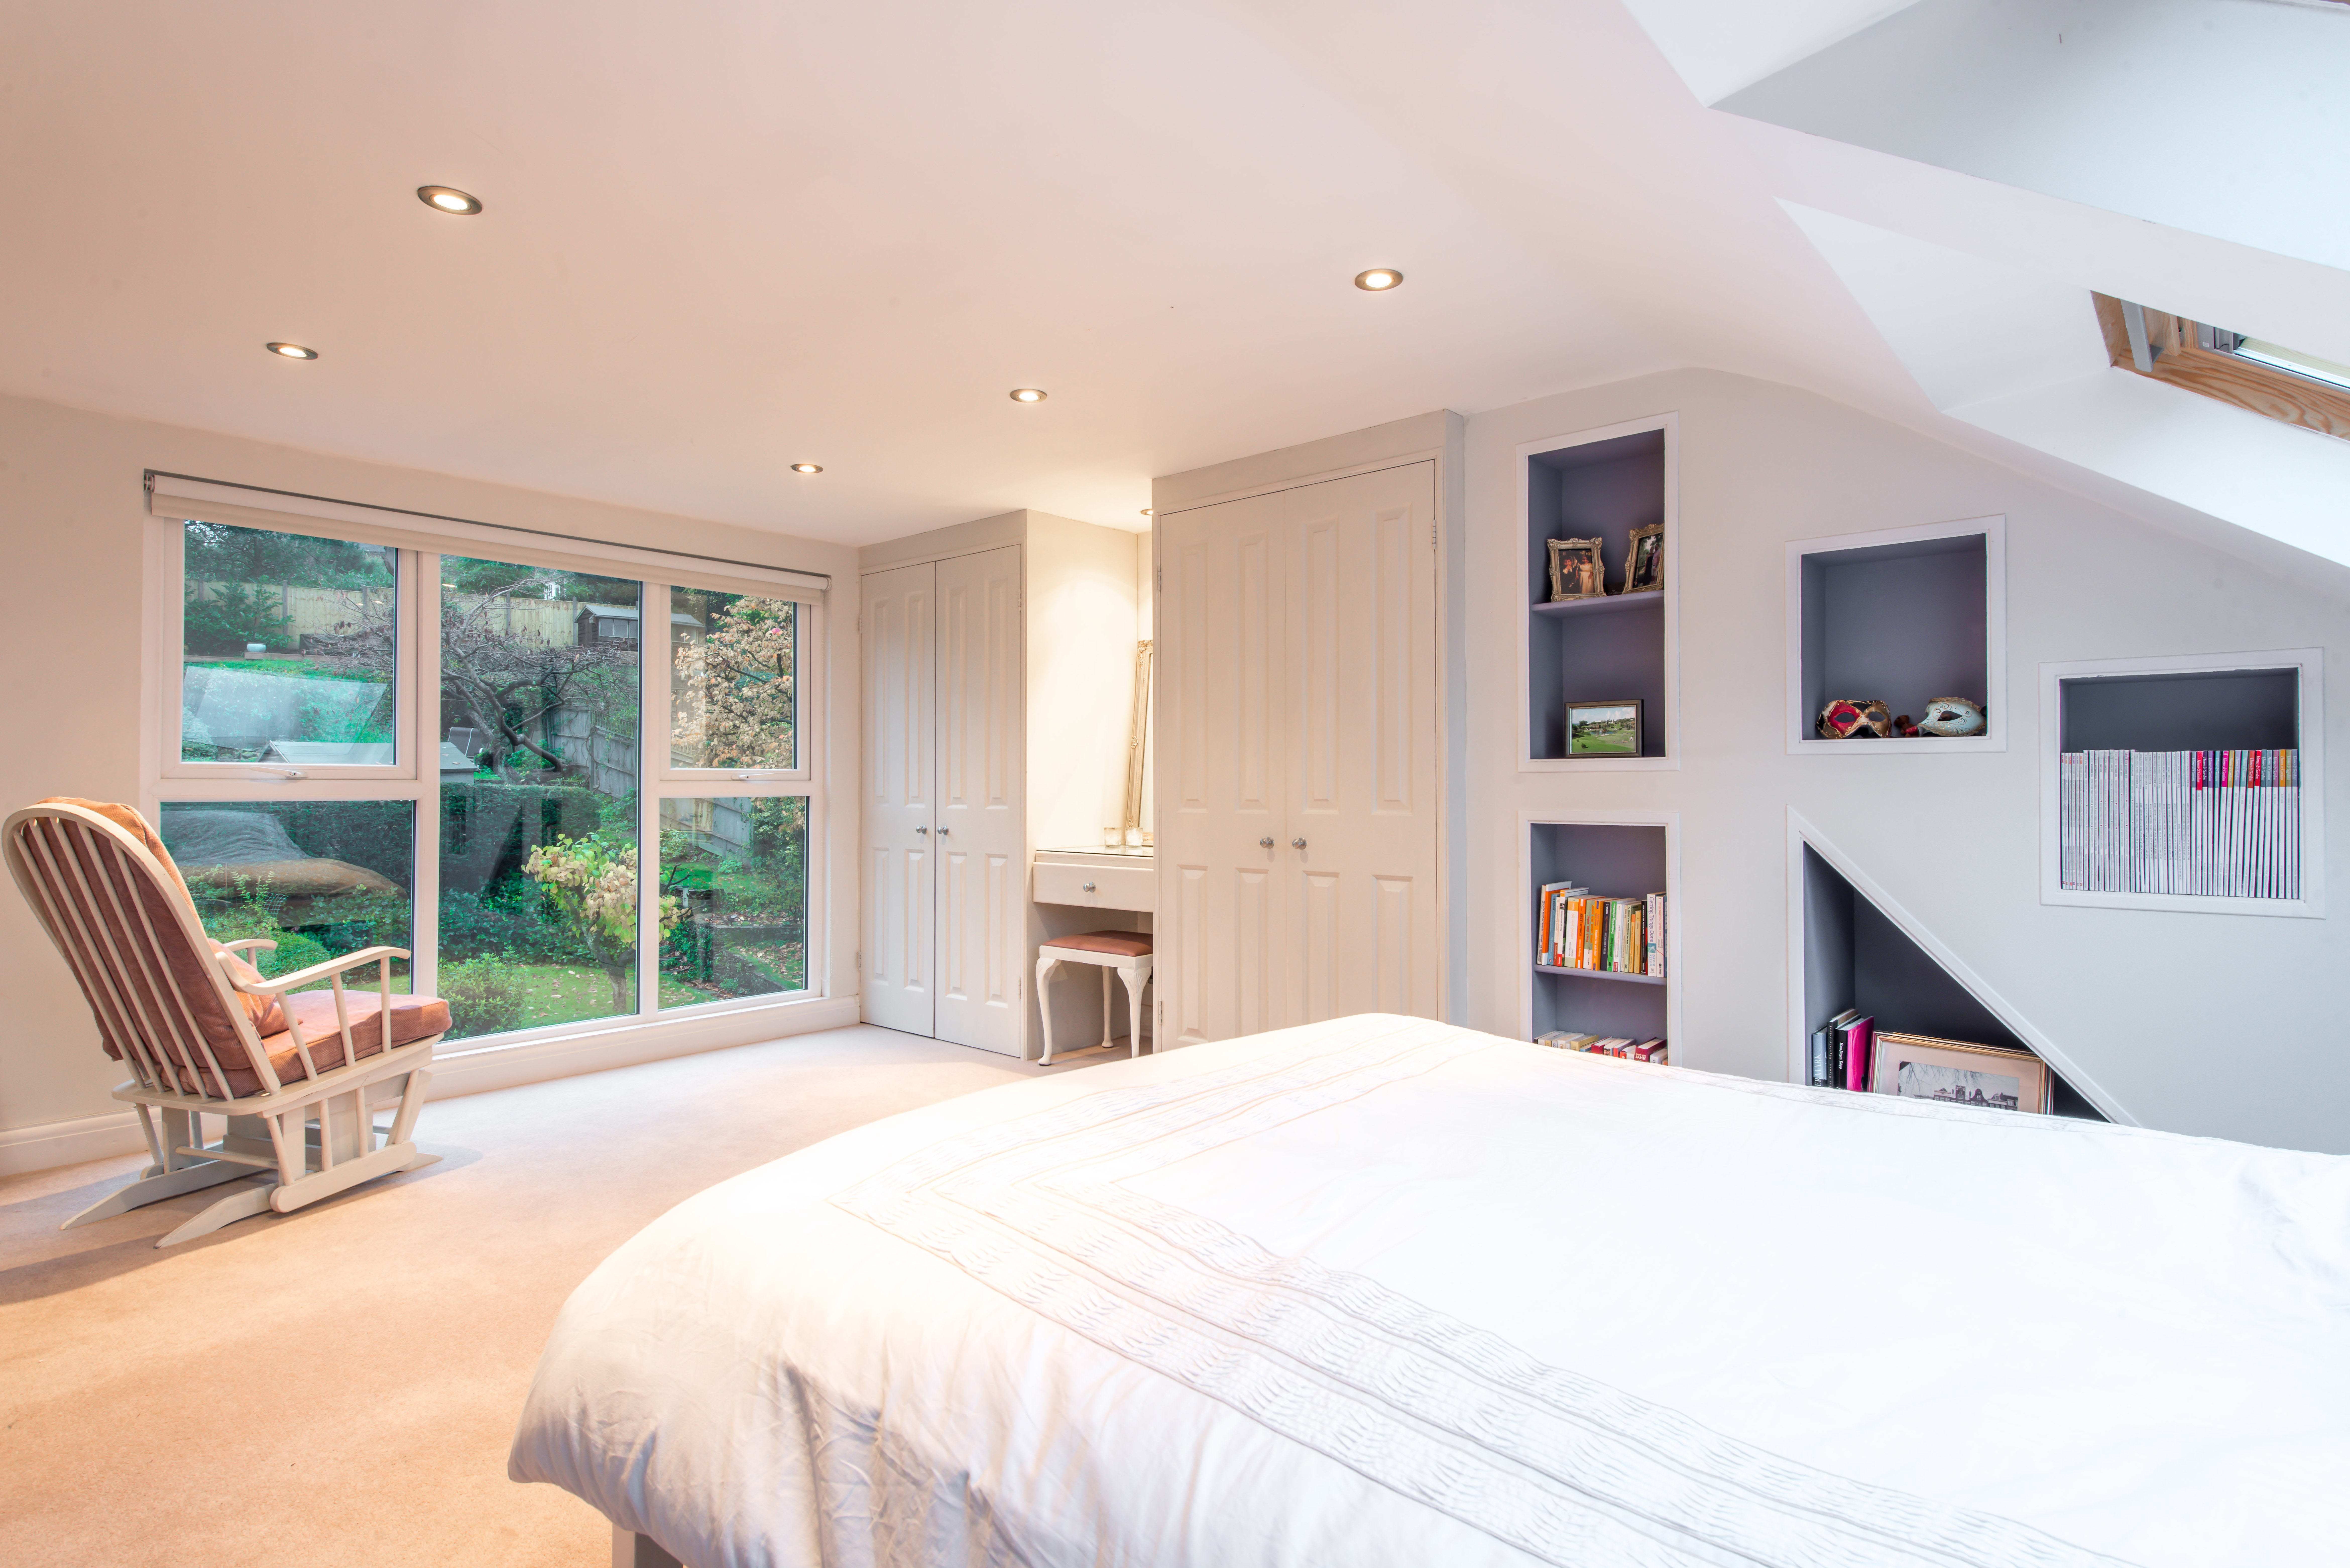 Loft Conversion Costs 2021 And How To, Is A Loft Conversion Classed As Bedroom